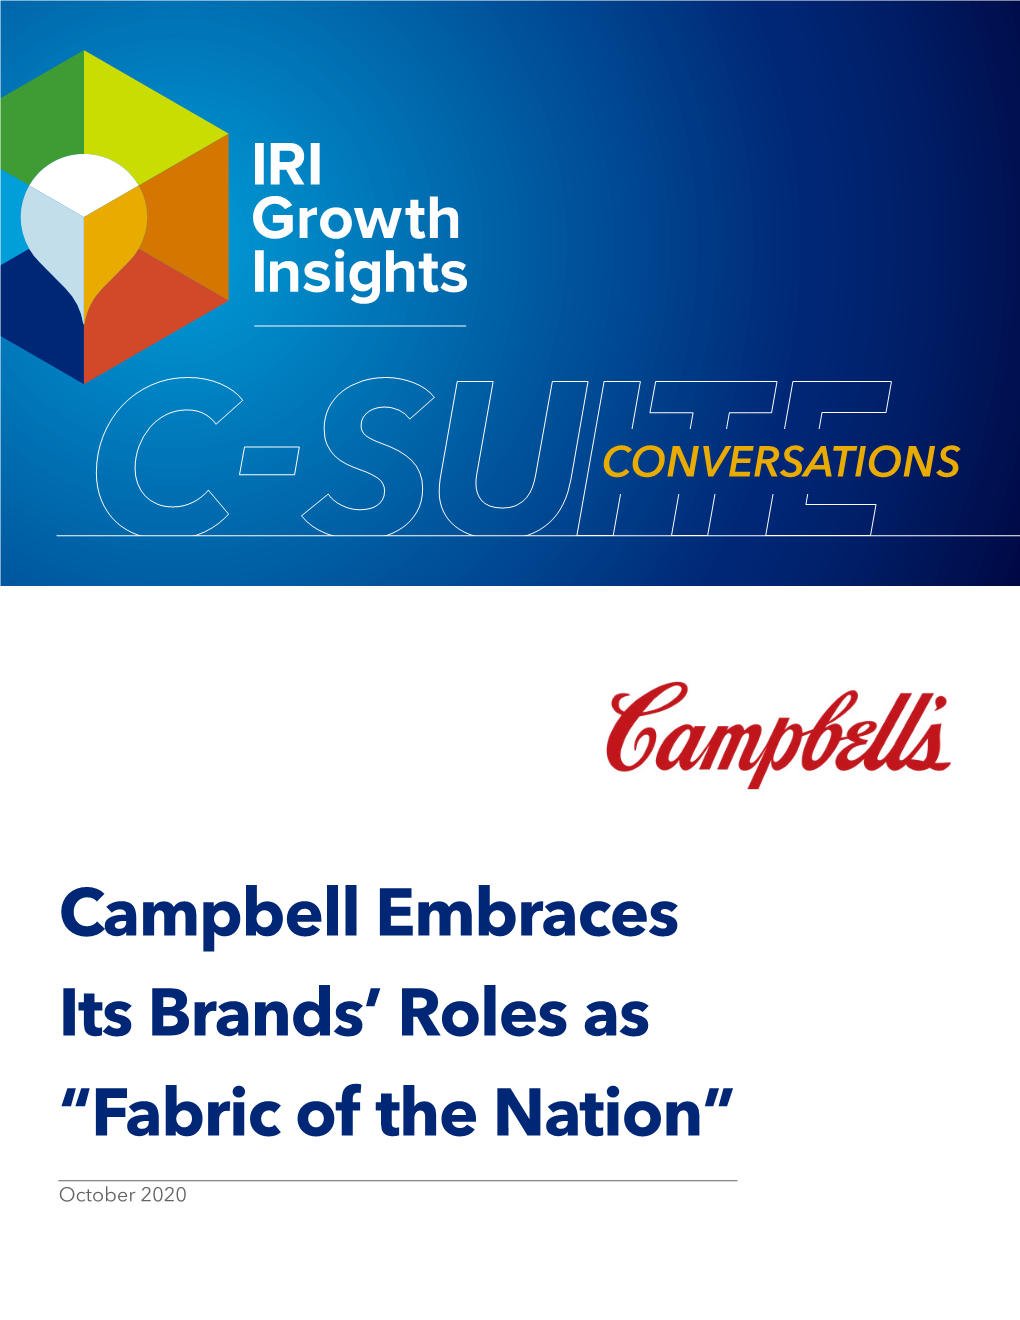 Campbell Embraces Its Brands' Roles As “Fabric of the Nation”